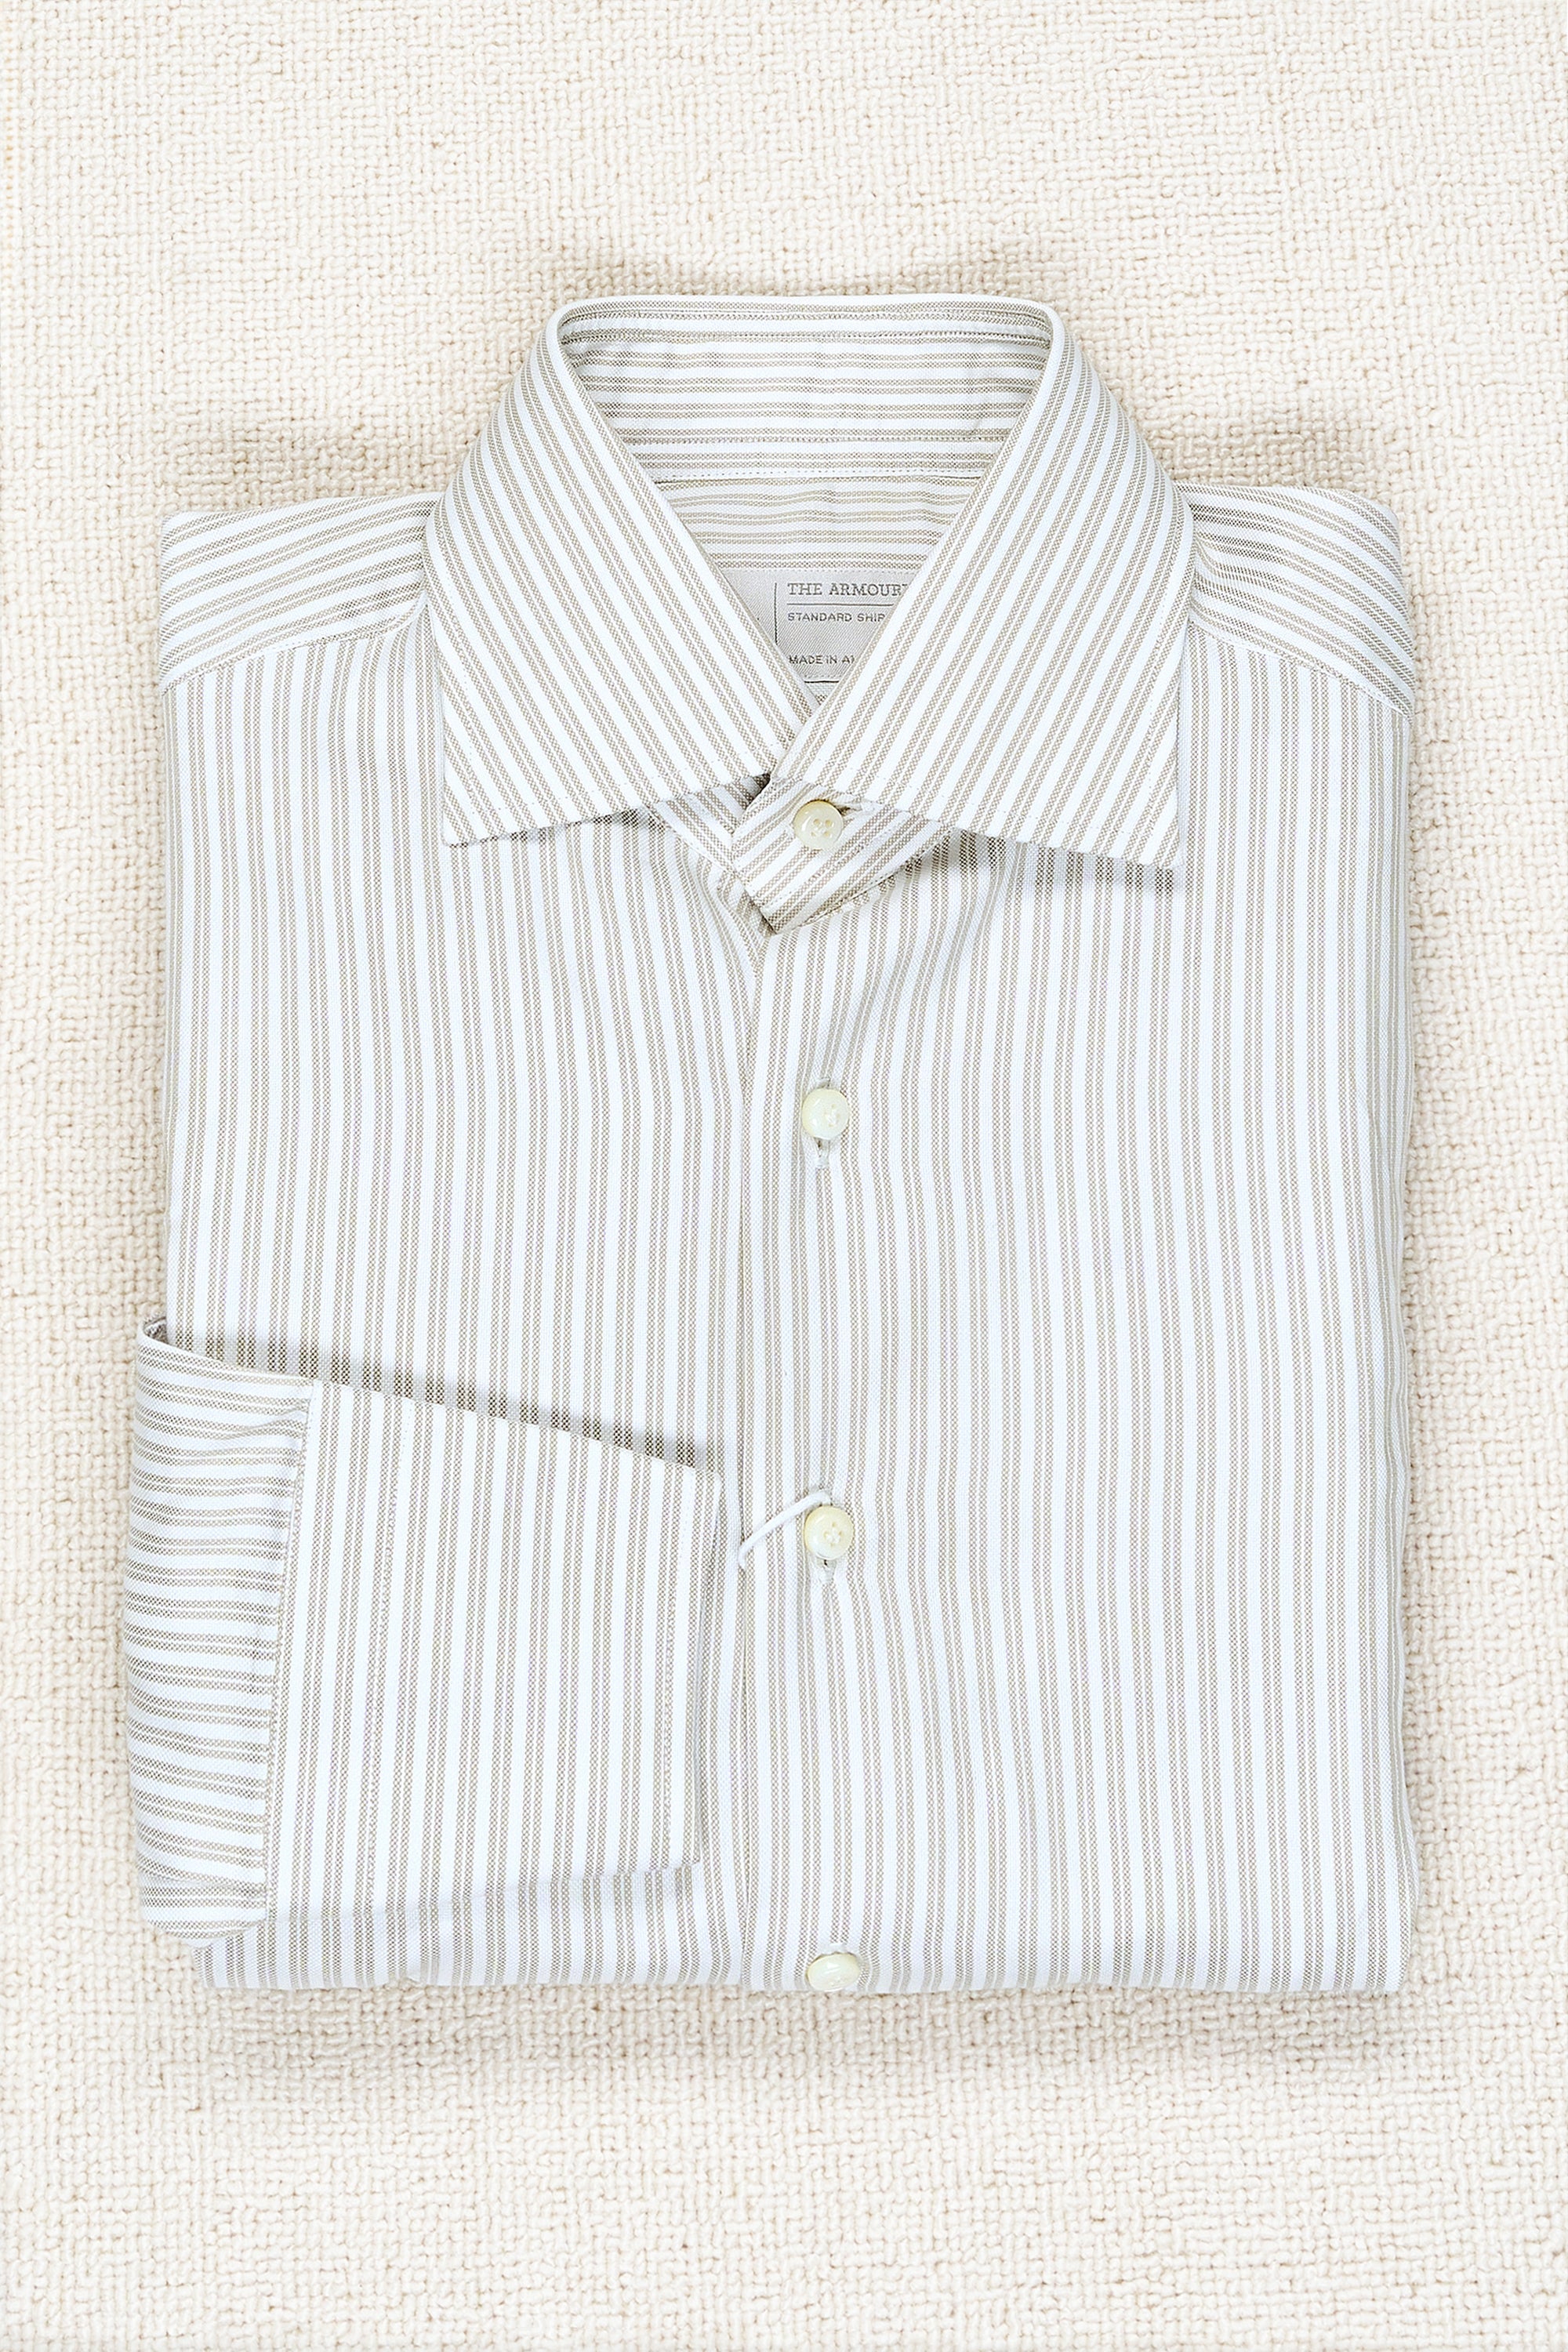 The Armoury by 100 Hands White/Brown Stripe Cotton Spread Collar Shirt *sample*